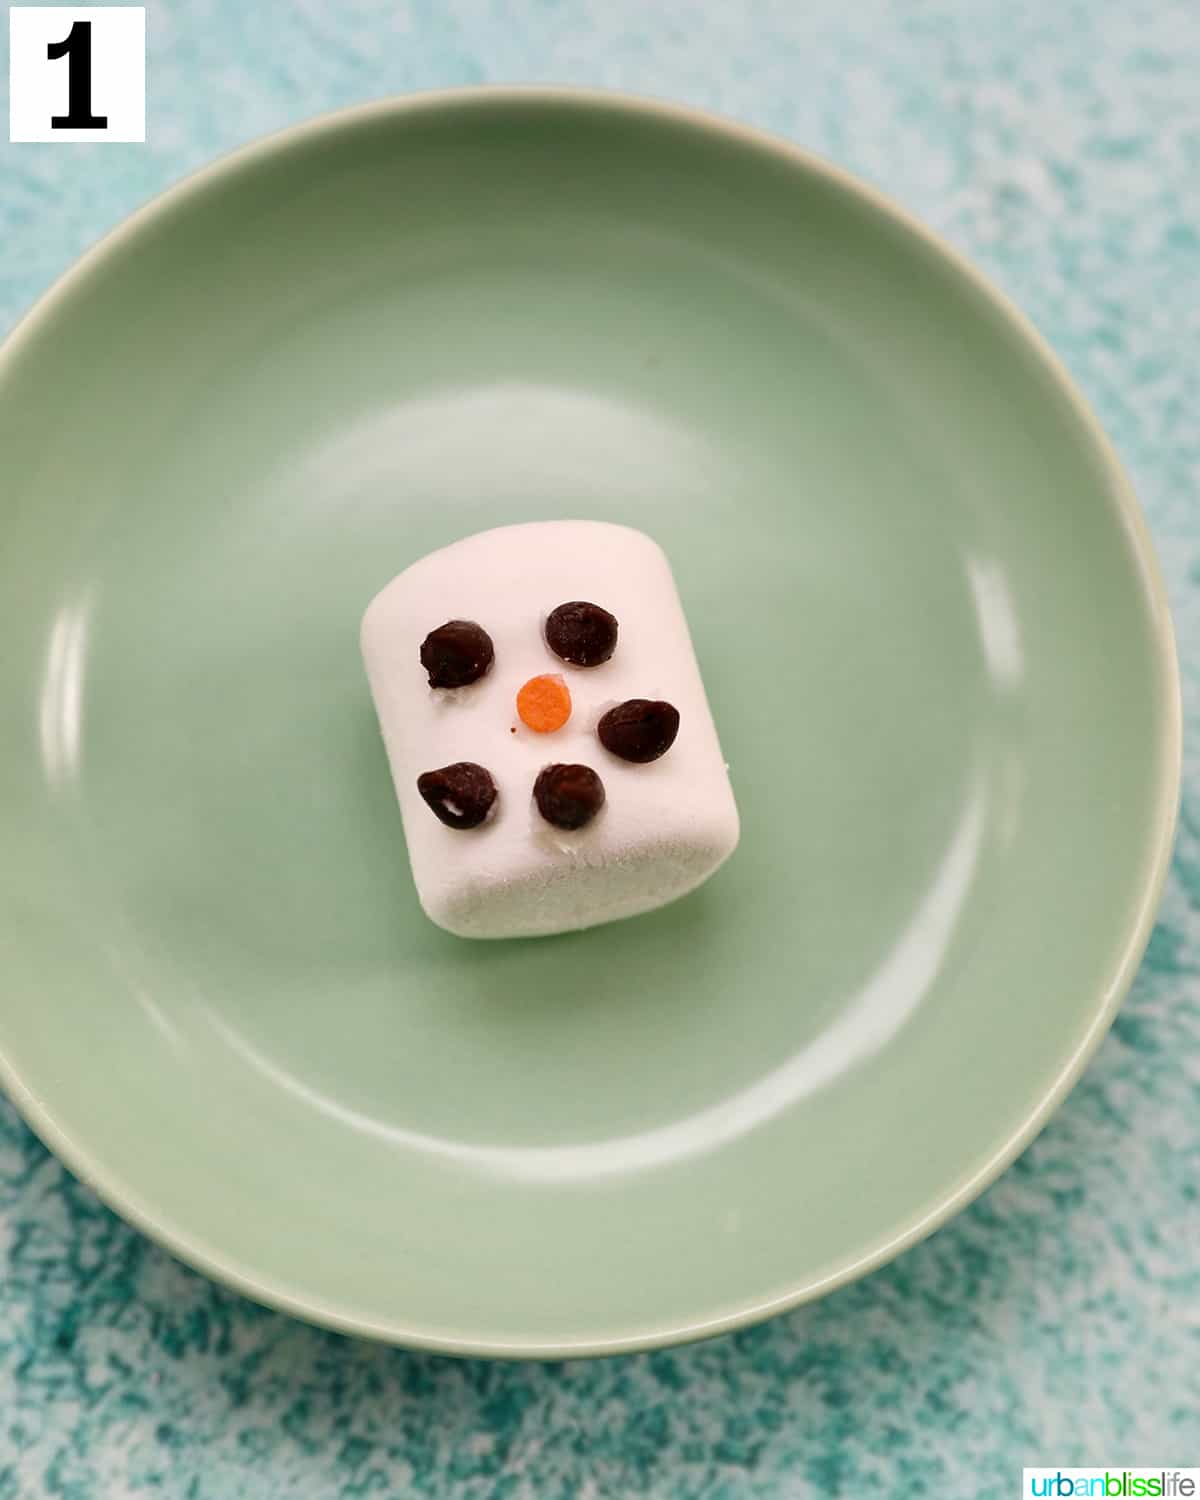 marshmallow with chocolate chips for eyes and mouth on a green plate.